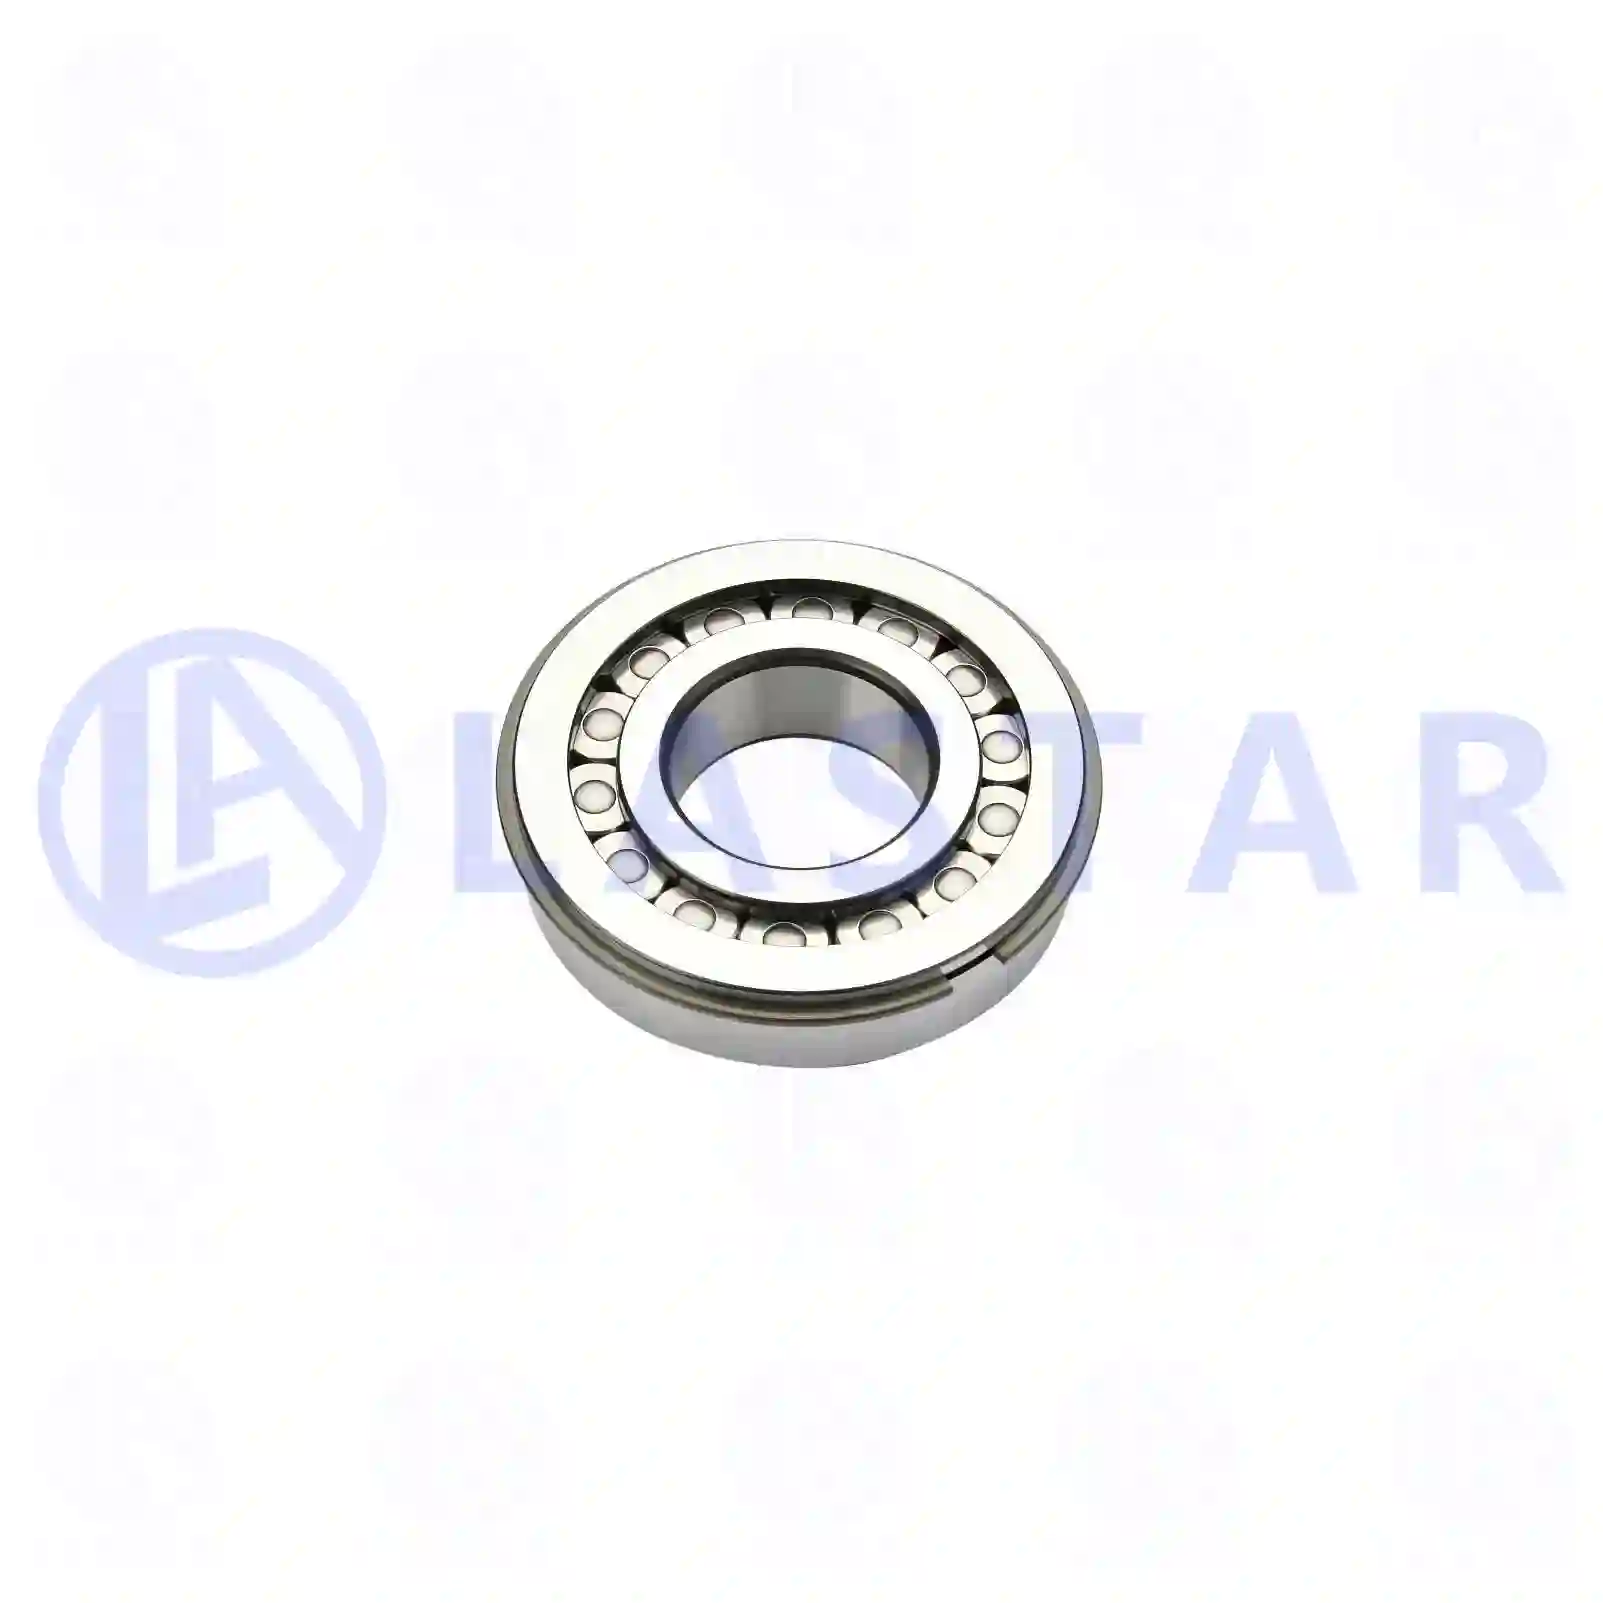 Roller bearing, 77731092, 1354652, 174947, , ||  77731092 Lastar Spare Part | Truck Spare Parts, Auotomotive Spare Parts Roller bearing, 77731092, 1354652, 174947, , ||  77731092 Lastar Spare Part | Truck Spare Parts, Auotomotive Spare Parts